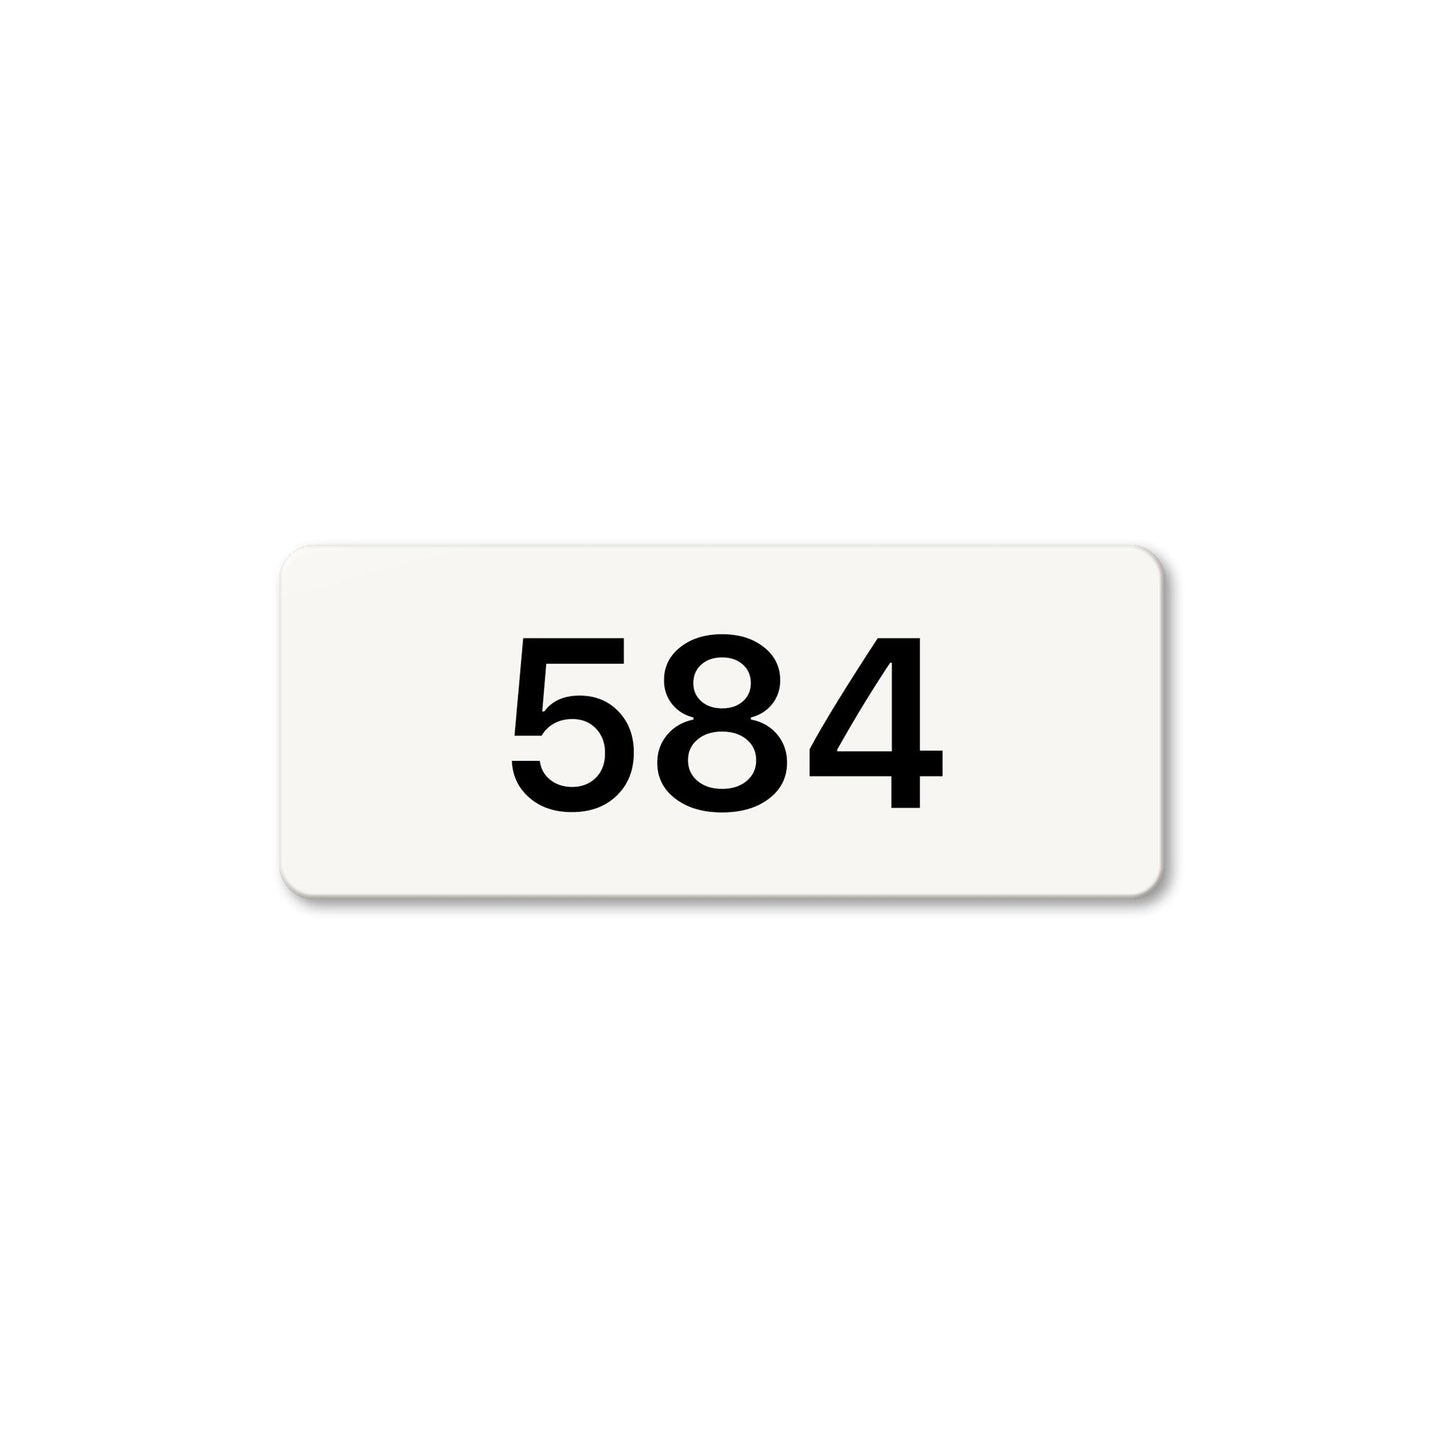 Numeral 584